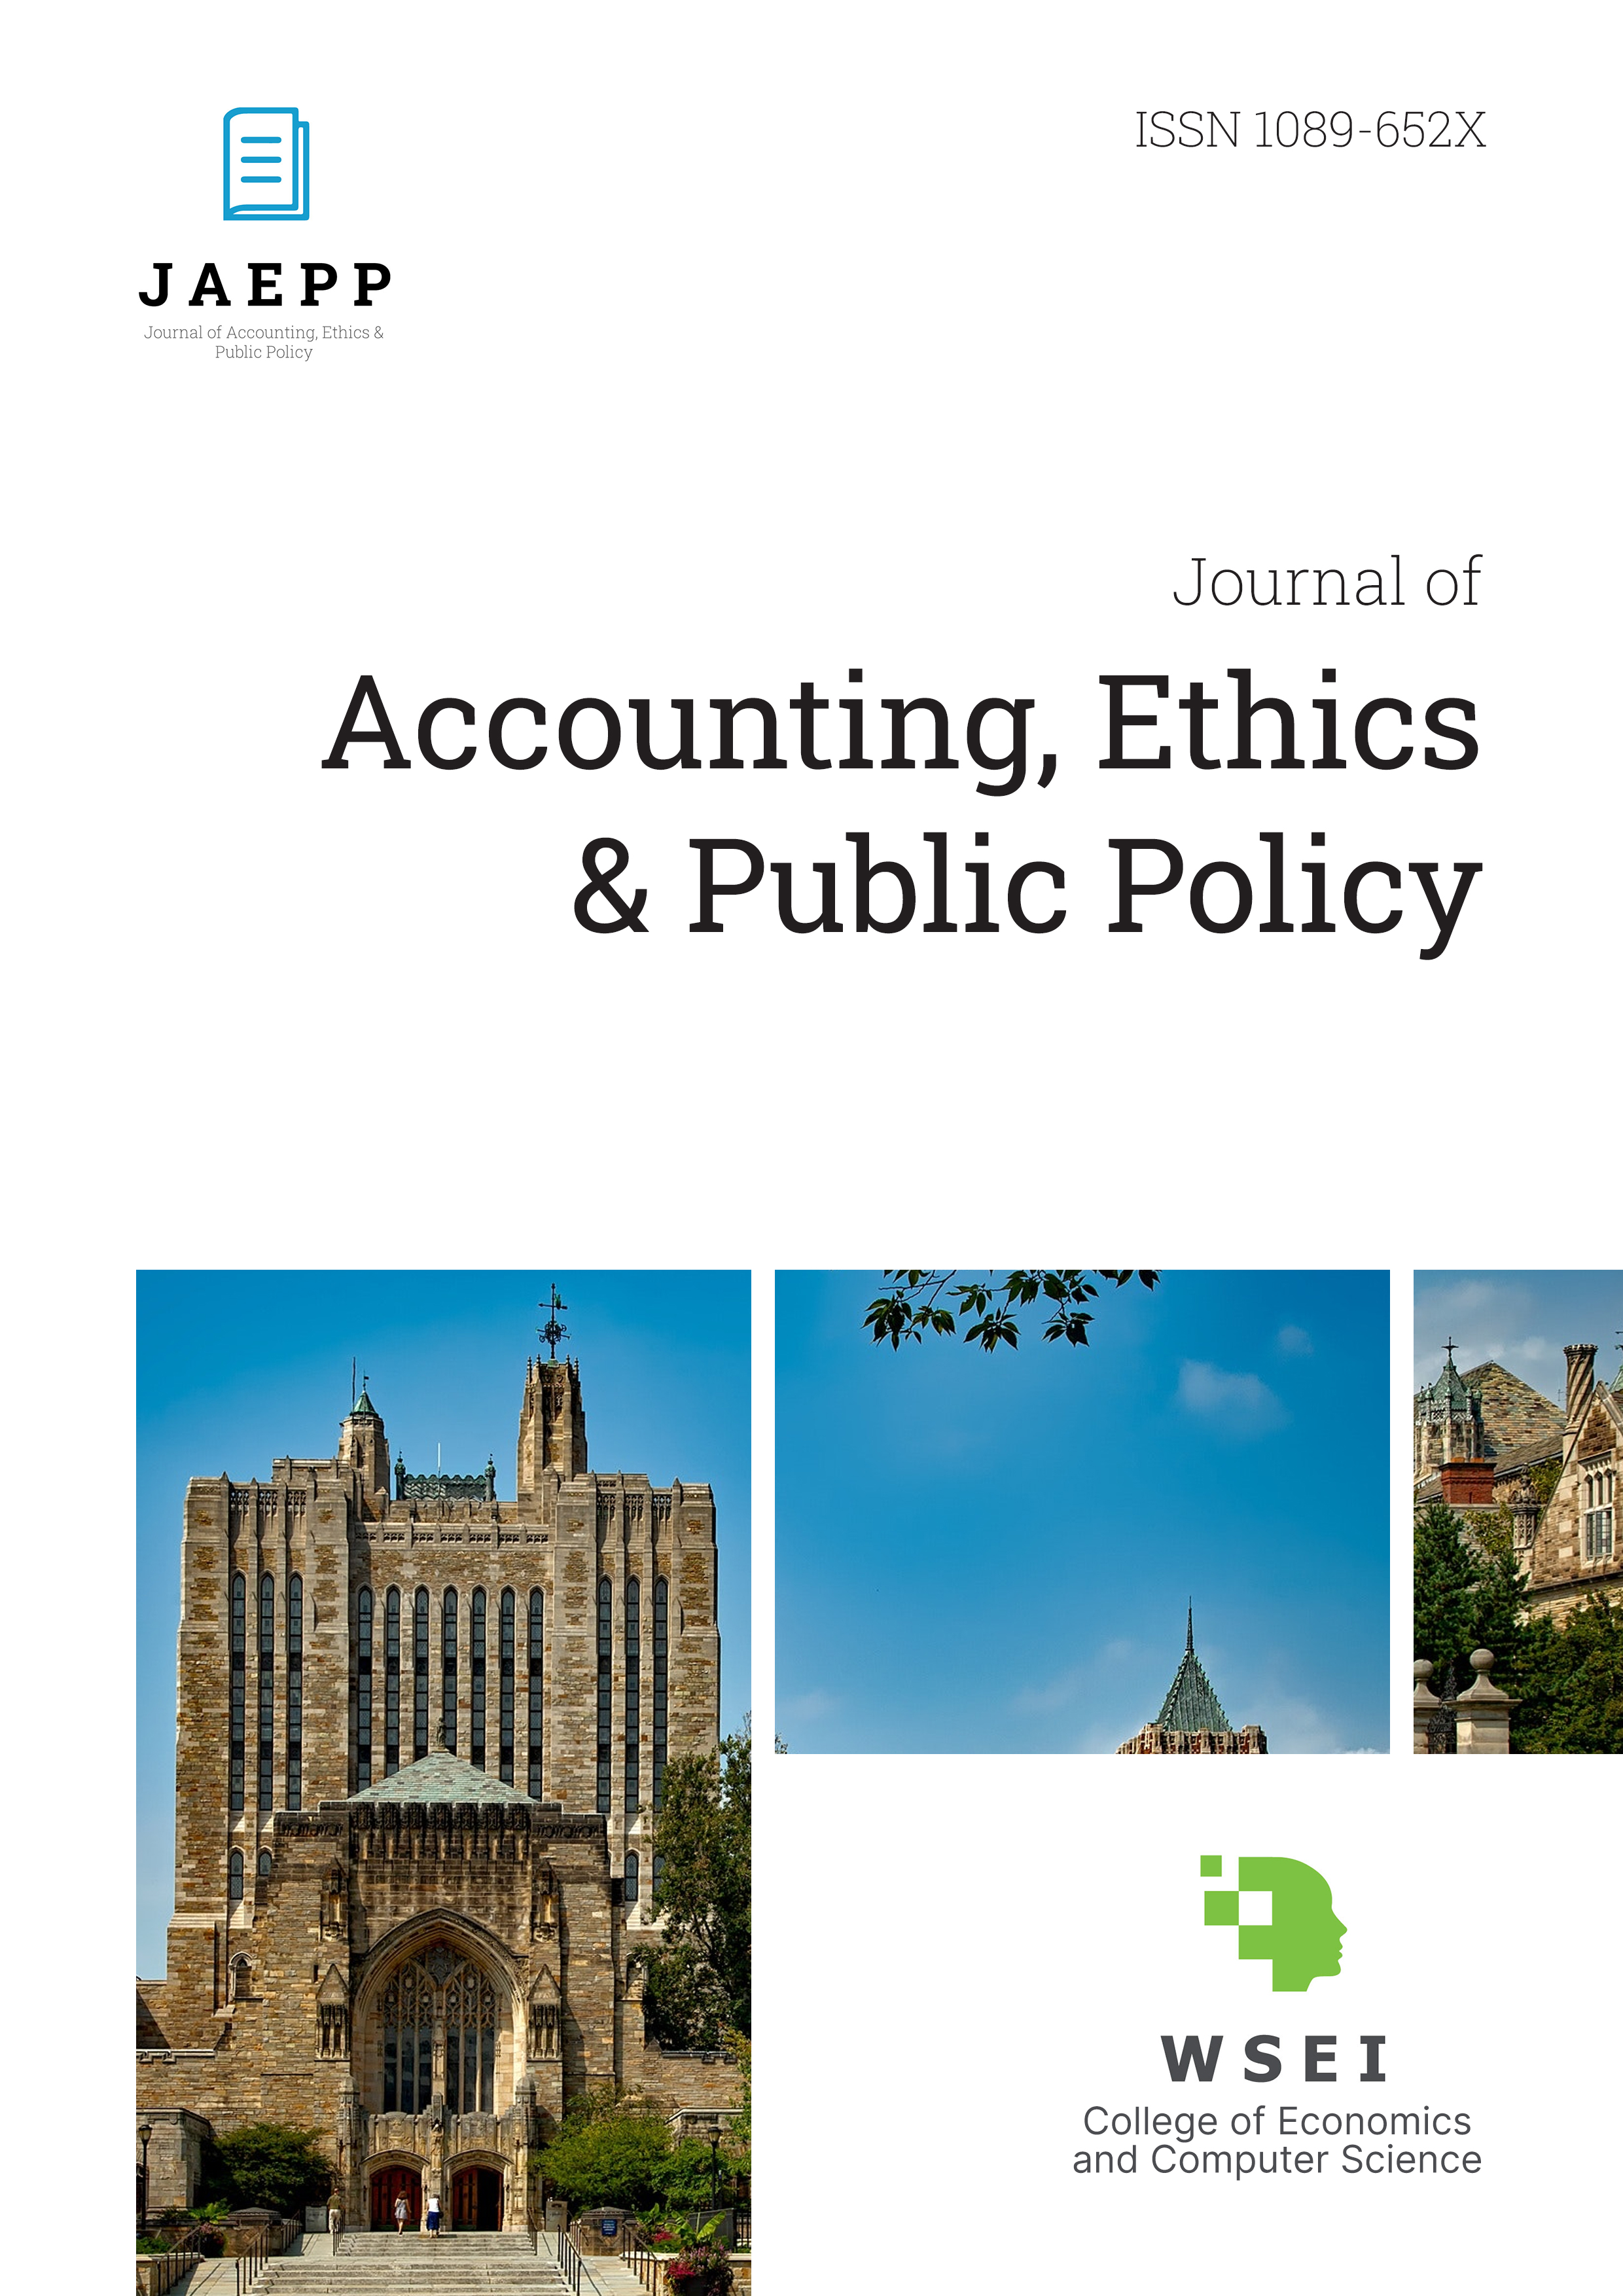 					View Vol. 21 No. 2 (2020): Journal of Accounting, Ethics & Public Policy, JAEPP
				